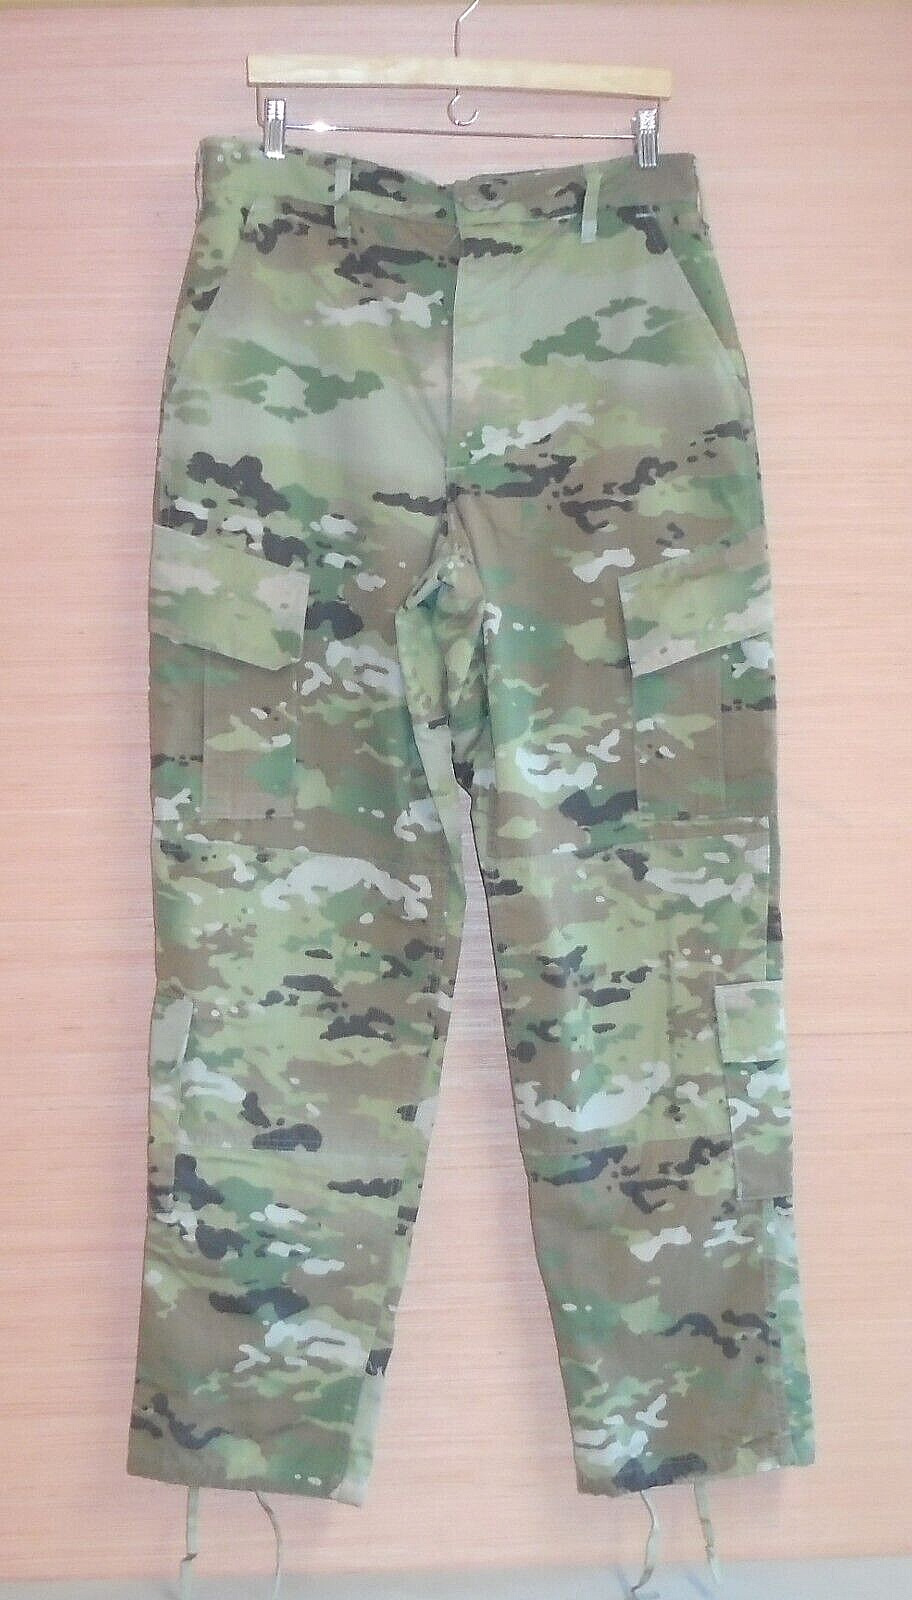 US Military Issue Unisex Army OCP Camo Combat Pants Trousers Size Medium Long